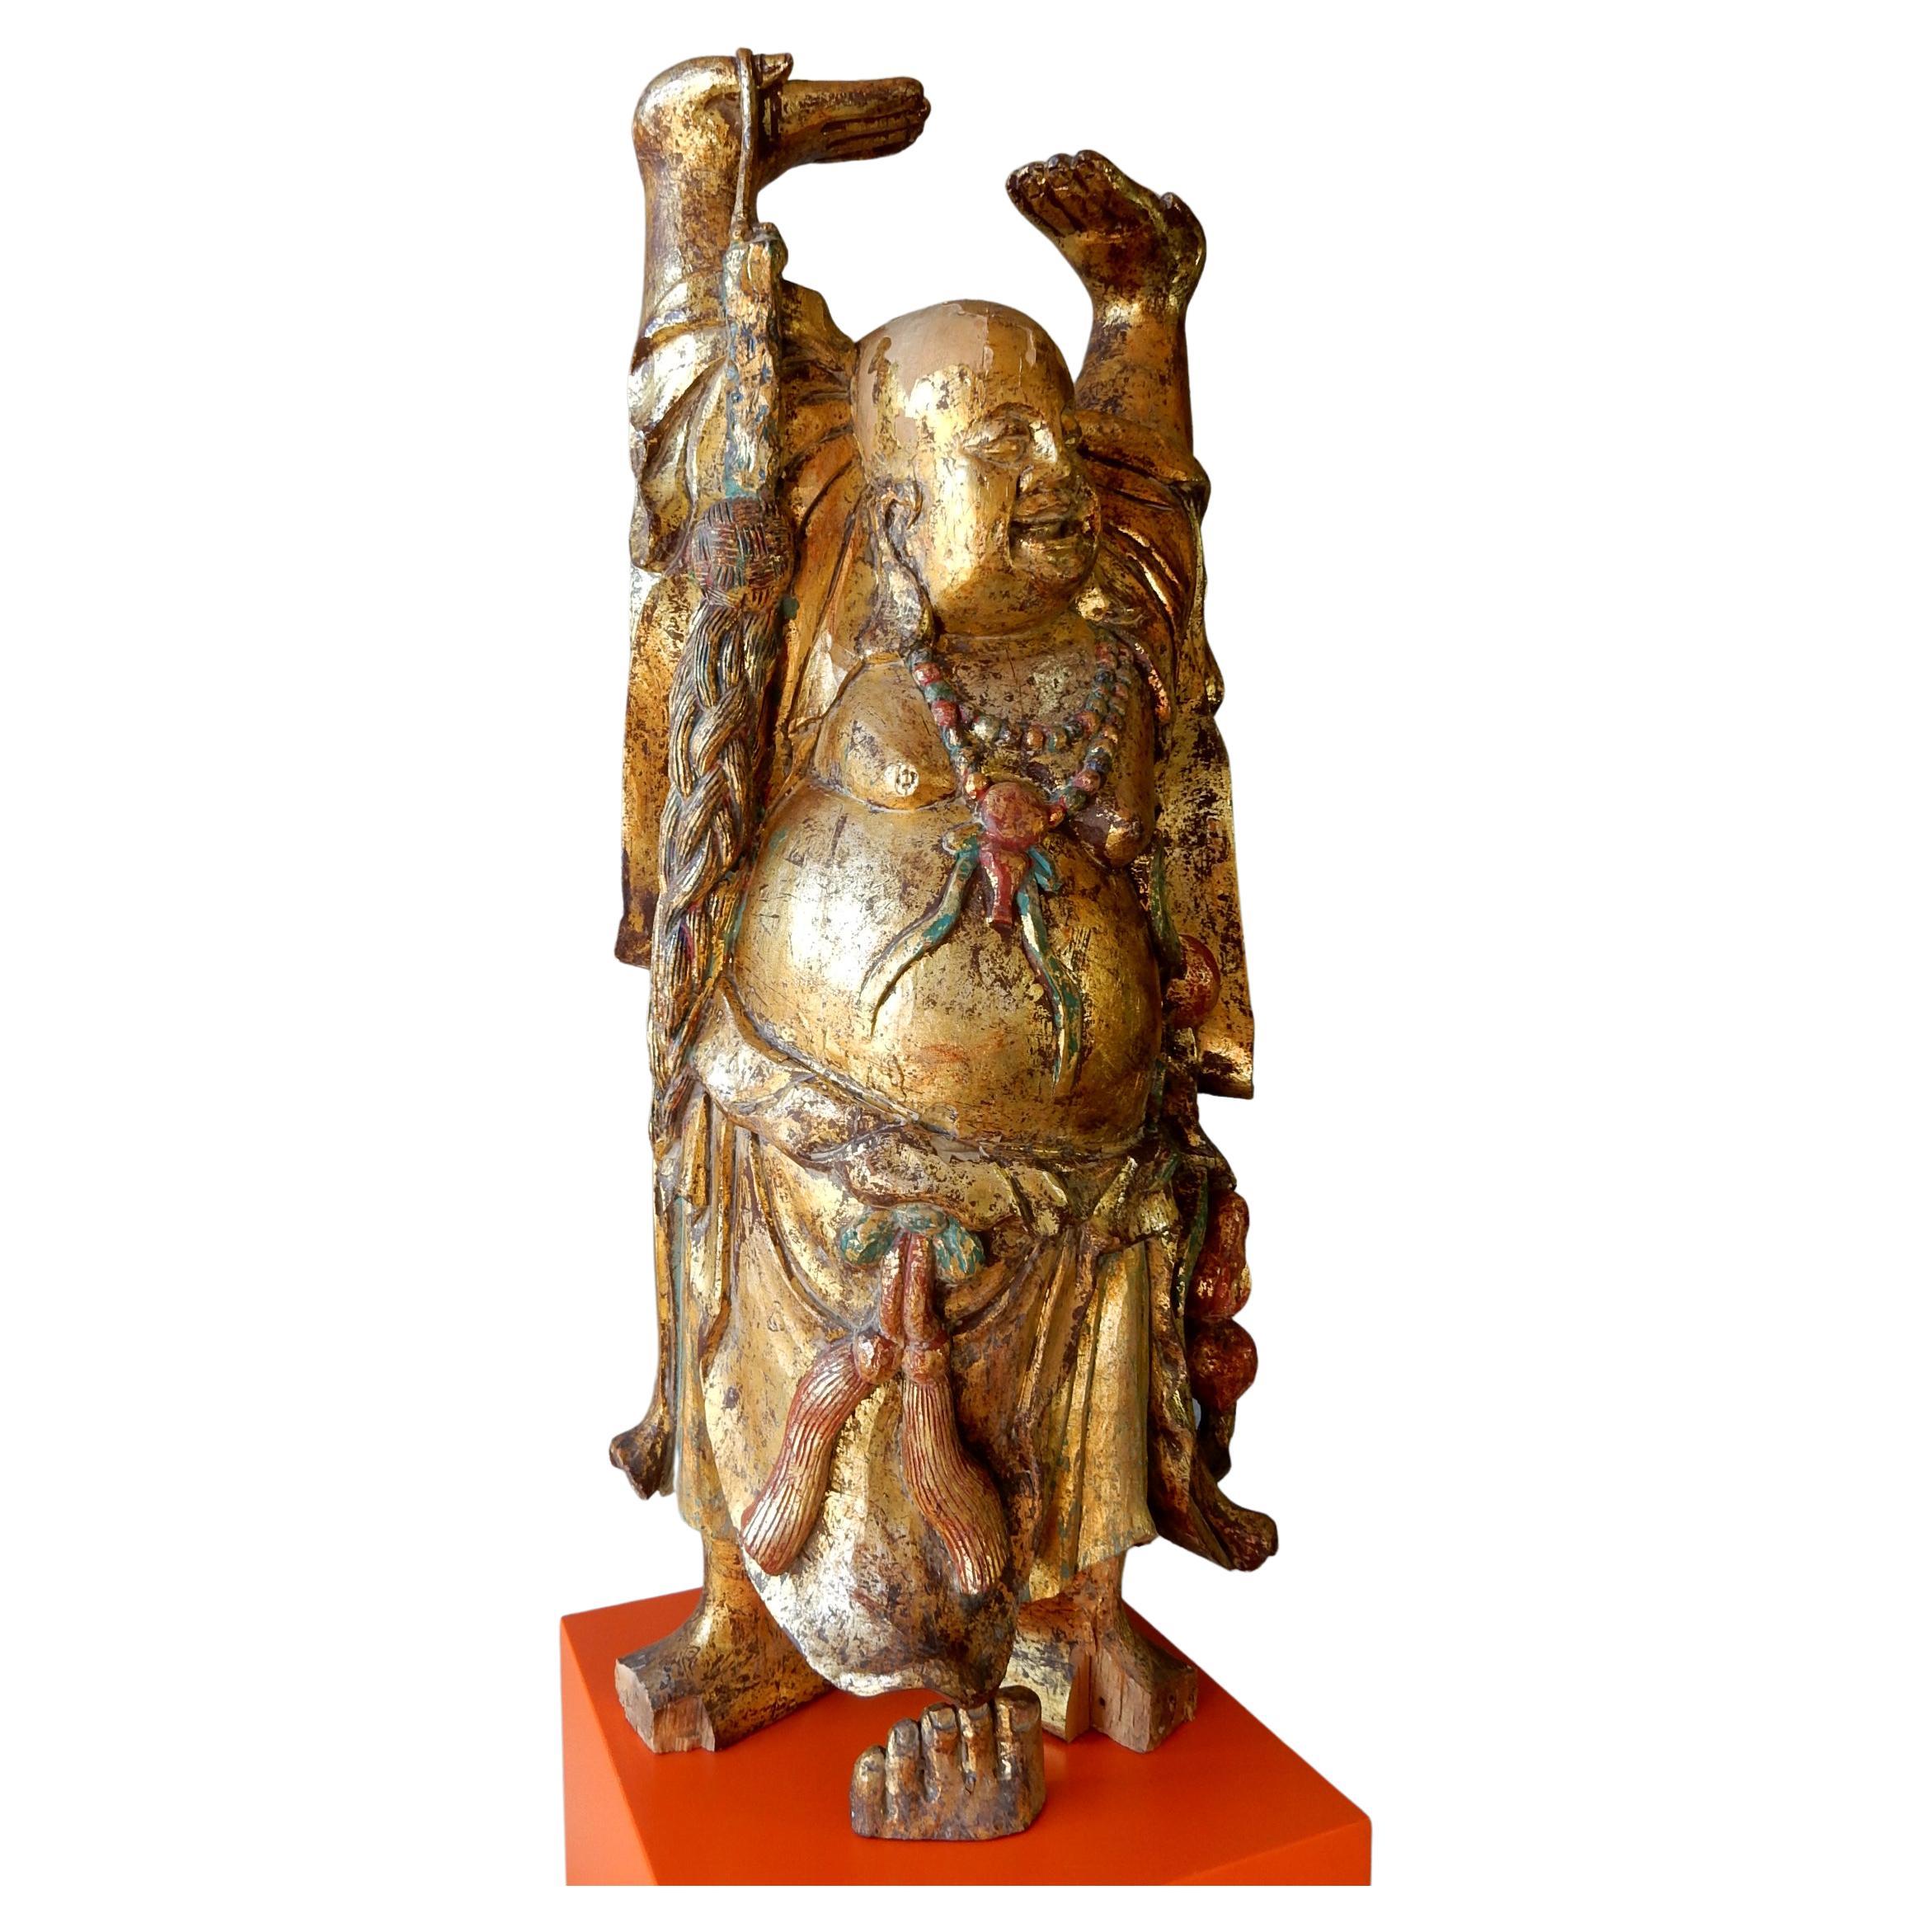 4 Foot Tall Vintage Happy Buddha Sculpture, Hand Carved & Painted In Fair Condition For Sale In Las Vegas, NV